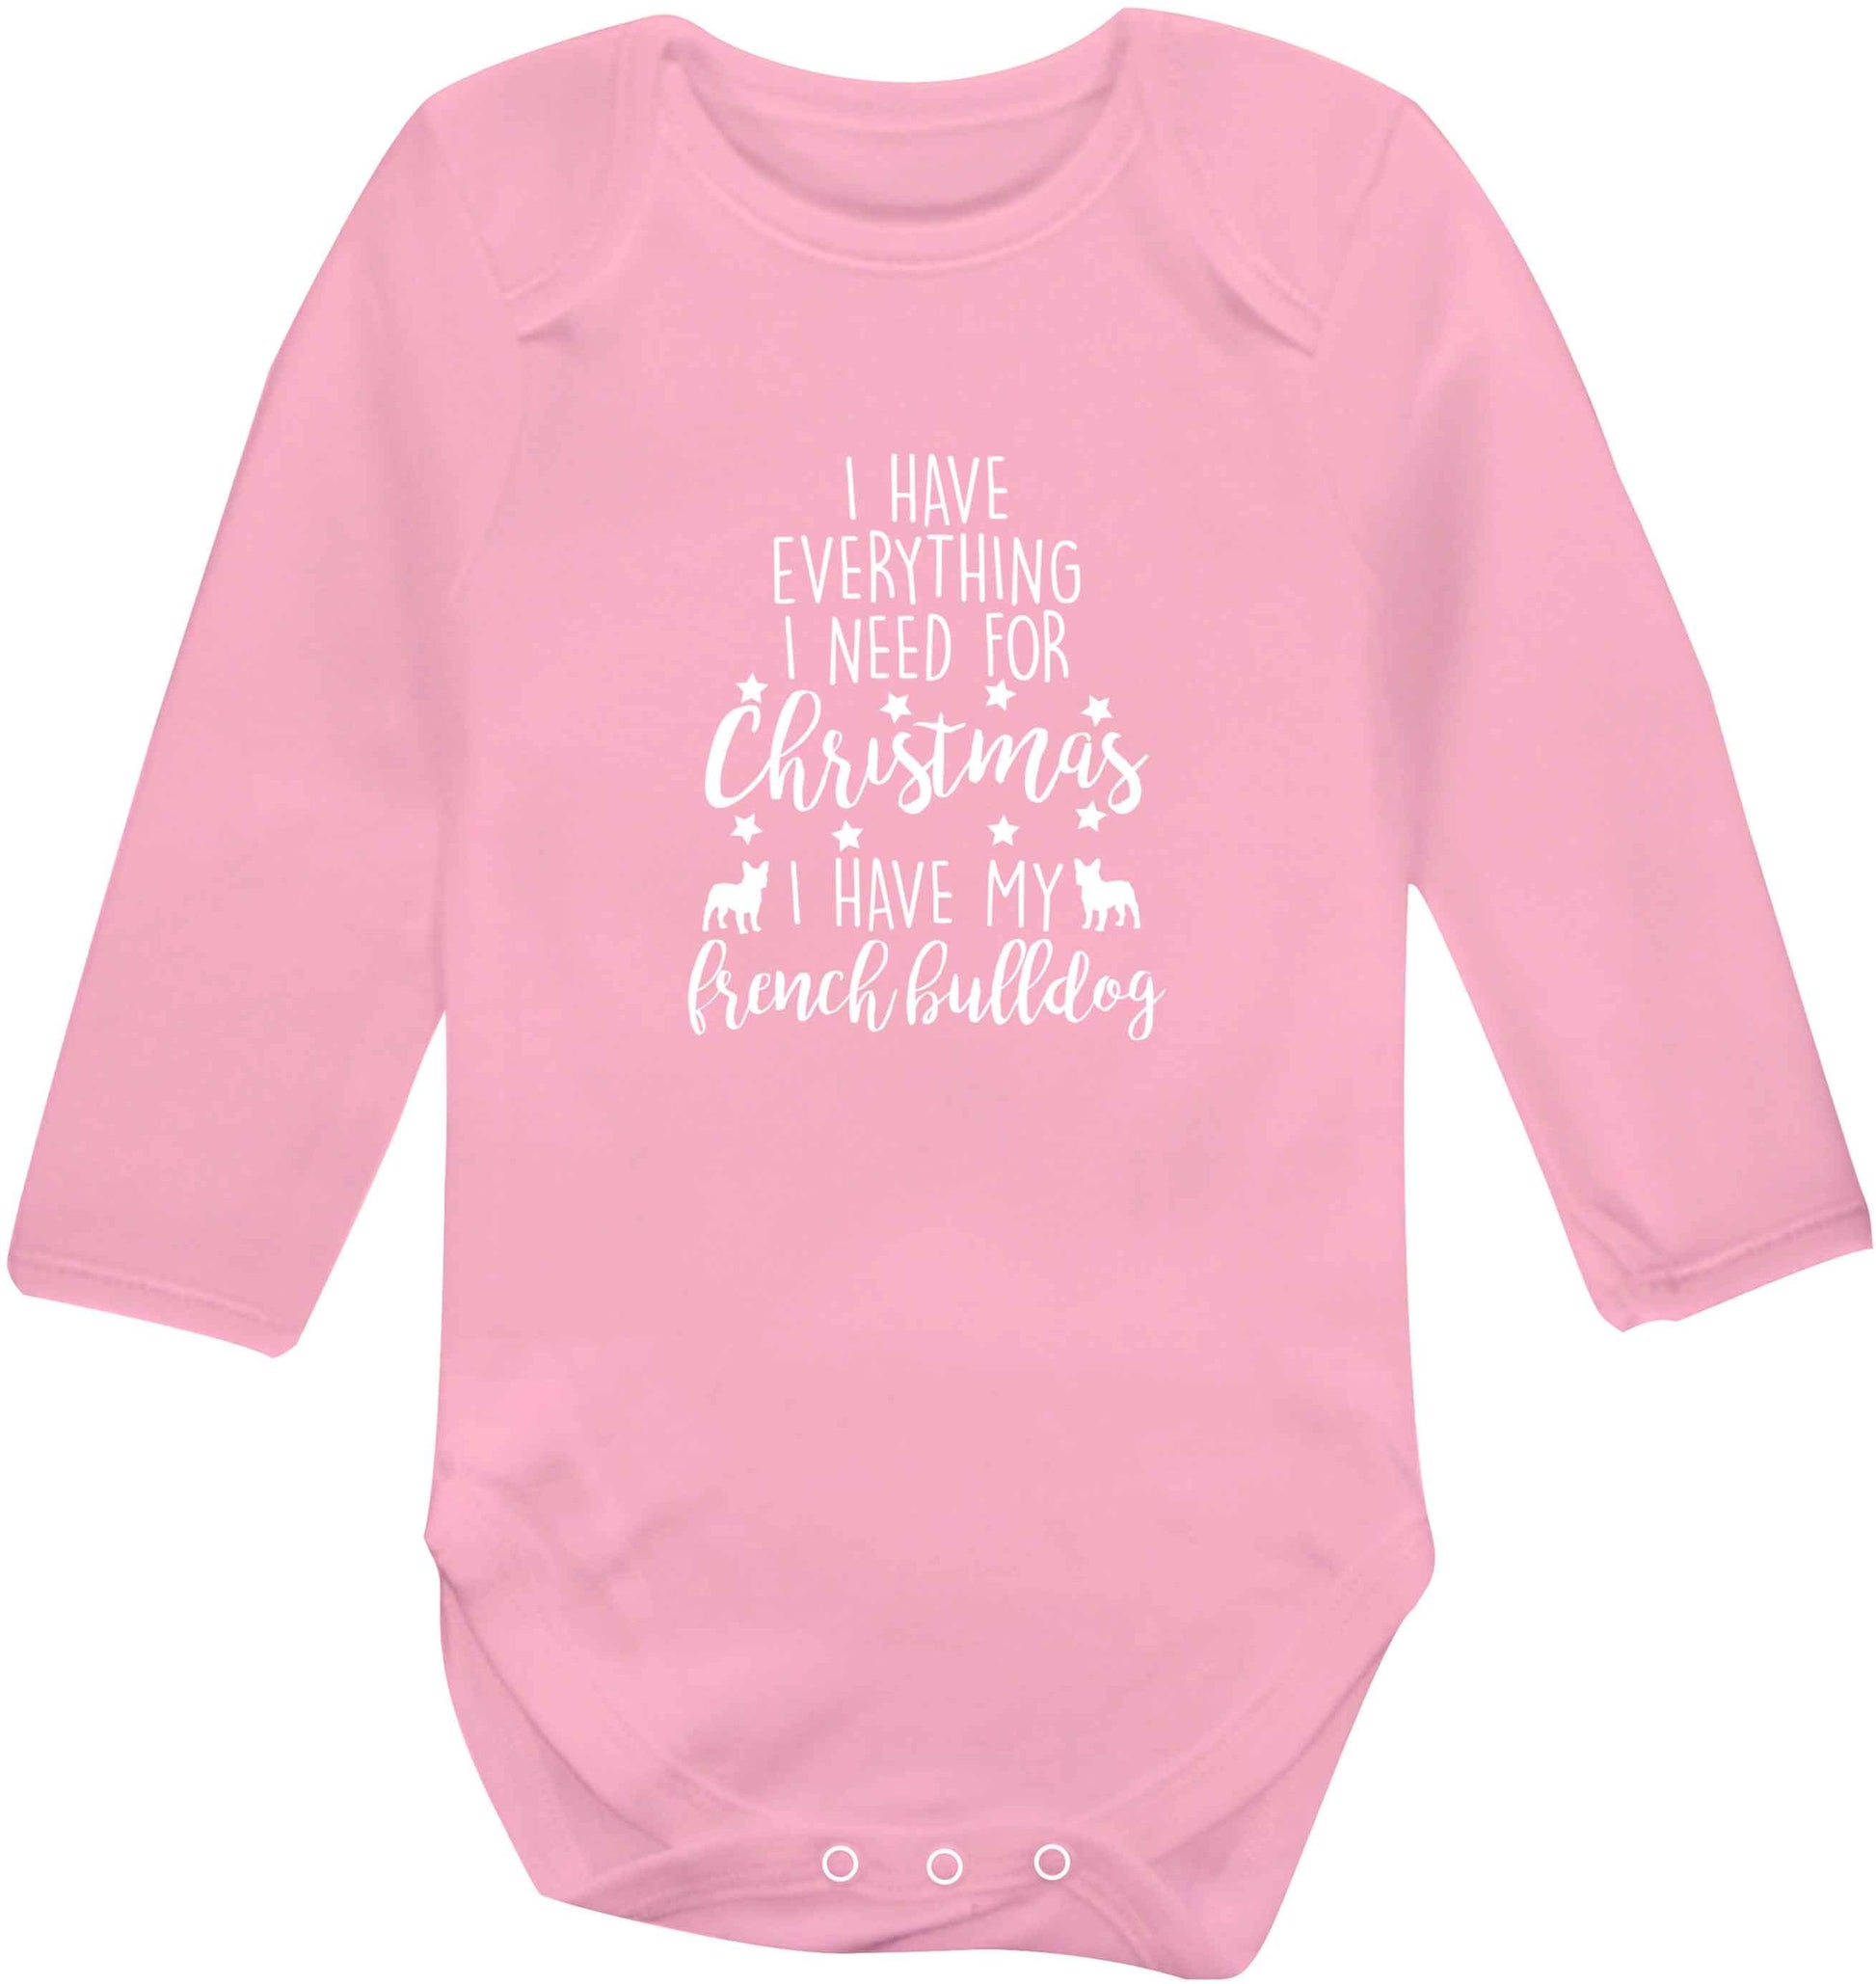 I have everything I need for Christmas I have my french bulldog baby vest long sleeved pale pink 6-12 months